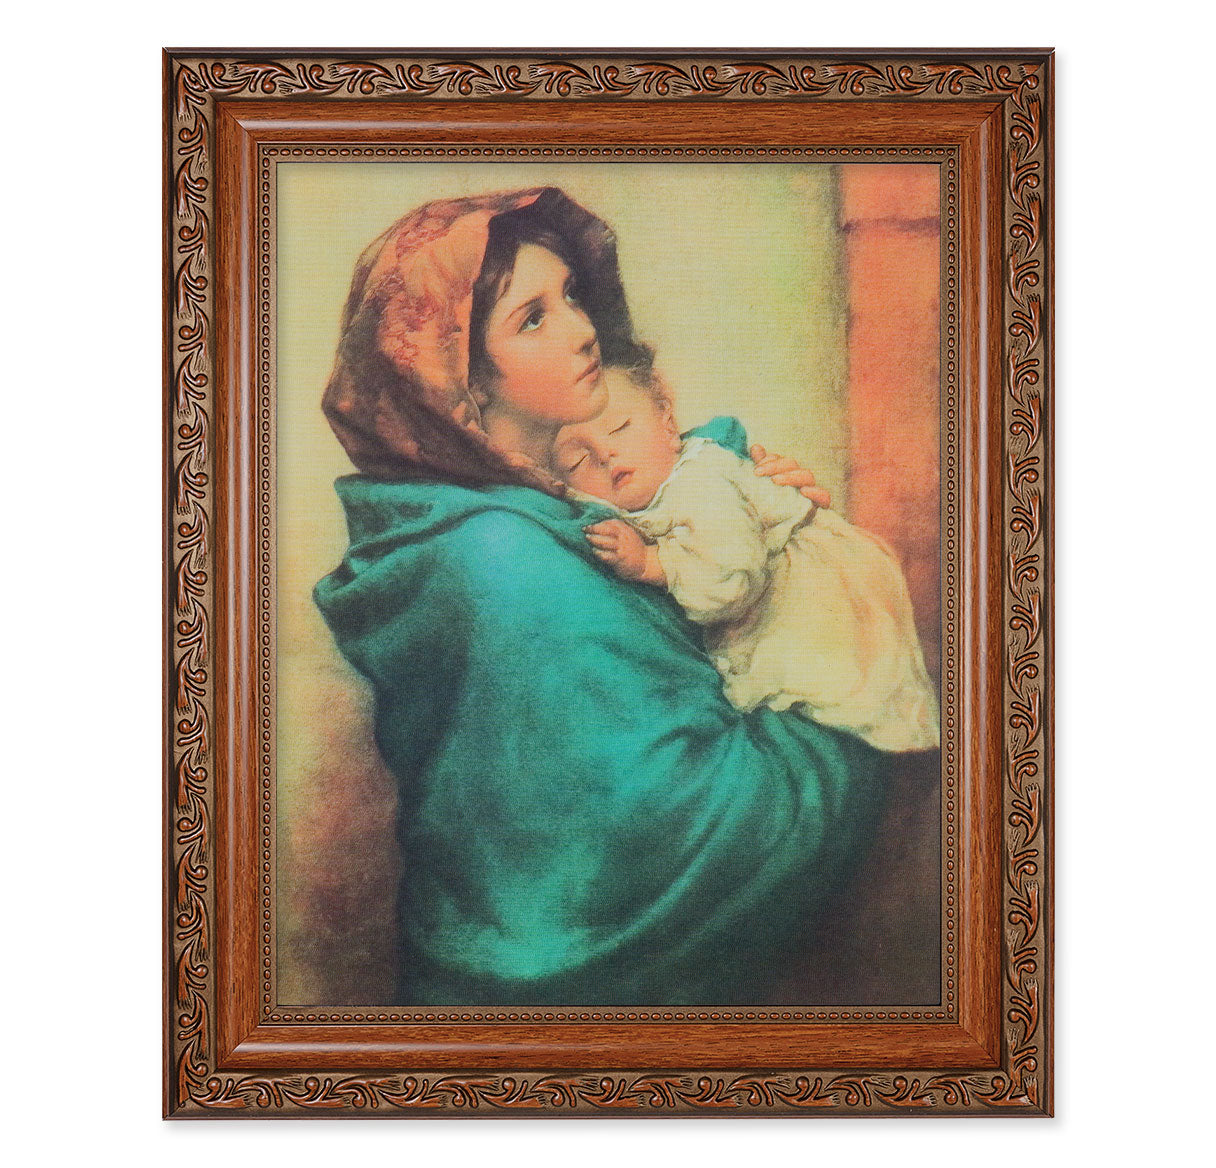 Madonna of the Streets Picture Framed Wall Art Decor, Large, Antiqued Dark Mahogany Finish Frame with Acanthus-Leaf Detailing